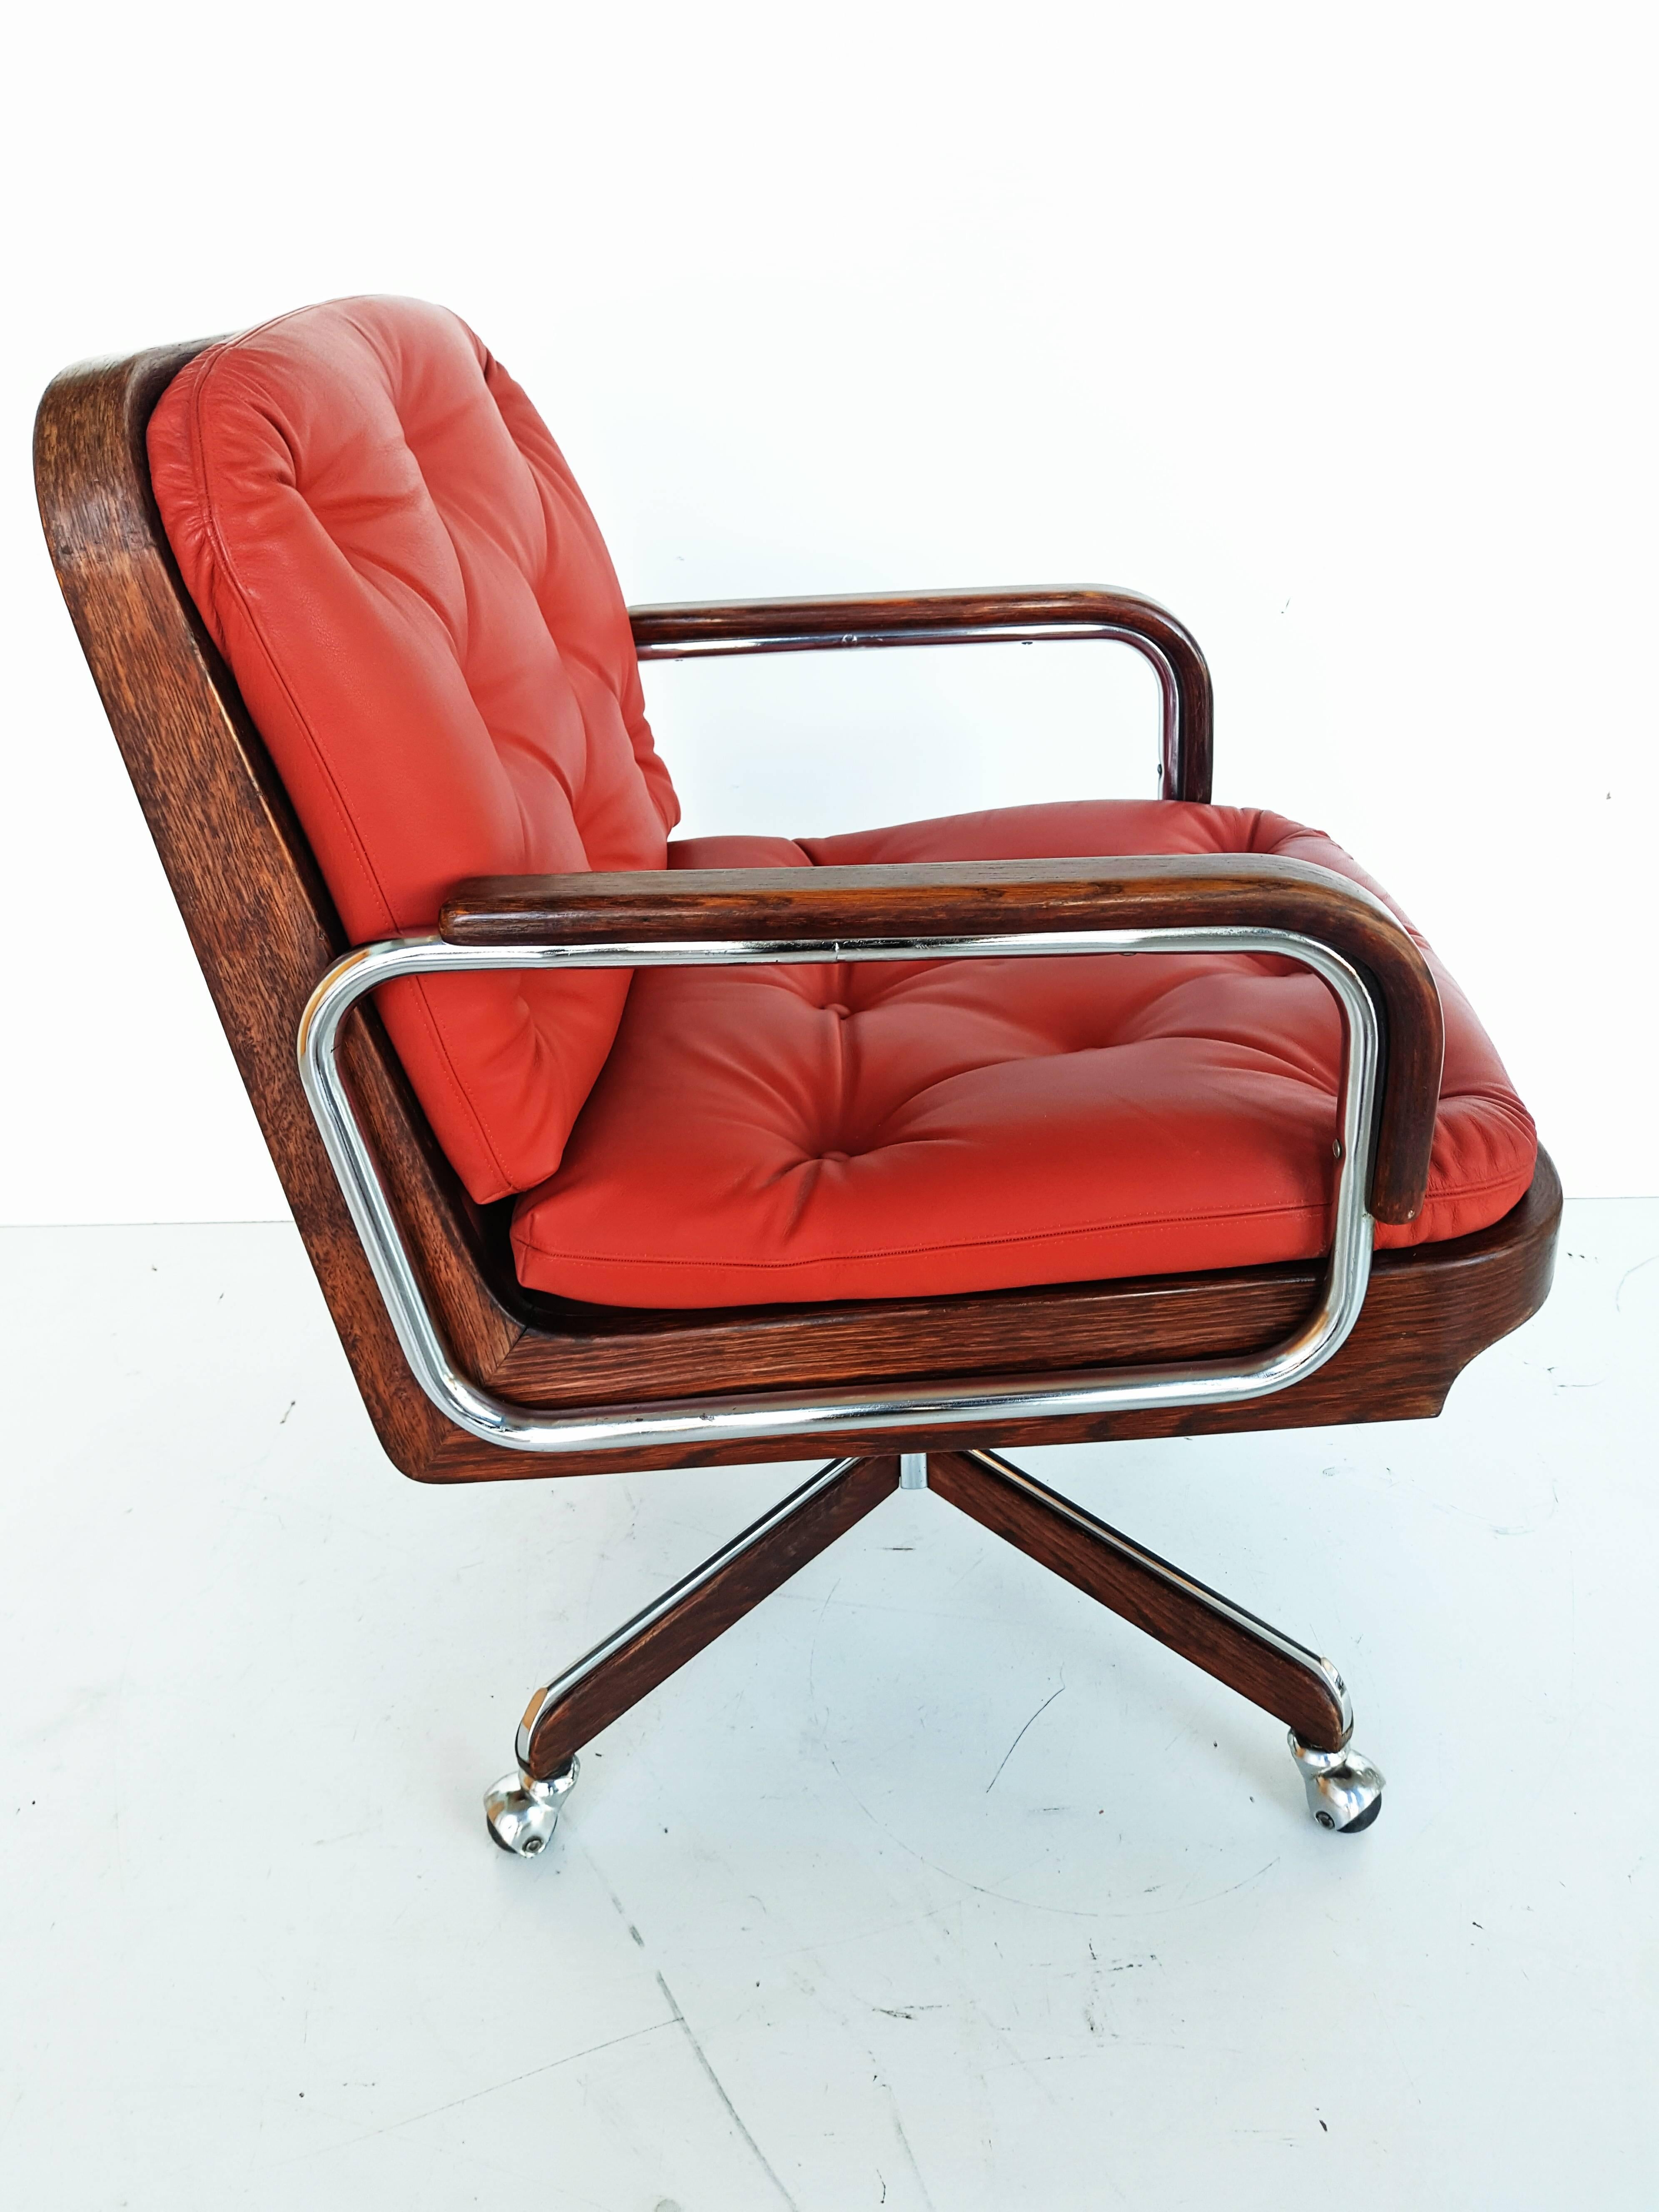 Rare swivel armchair, in a beautiful blood orange leather with chrome and wood manufactured in Spain by Ag Barcelona in 1970s. Very high quality and very heavy, adjustable height with a minimum seating of 45 cm and a maximum of 60 cm. Very